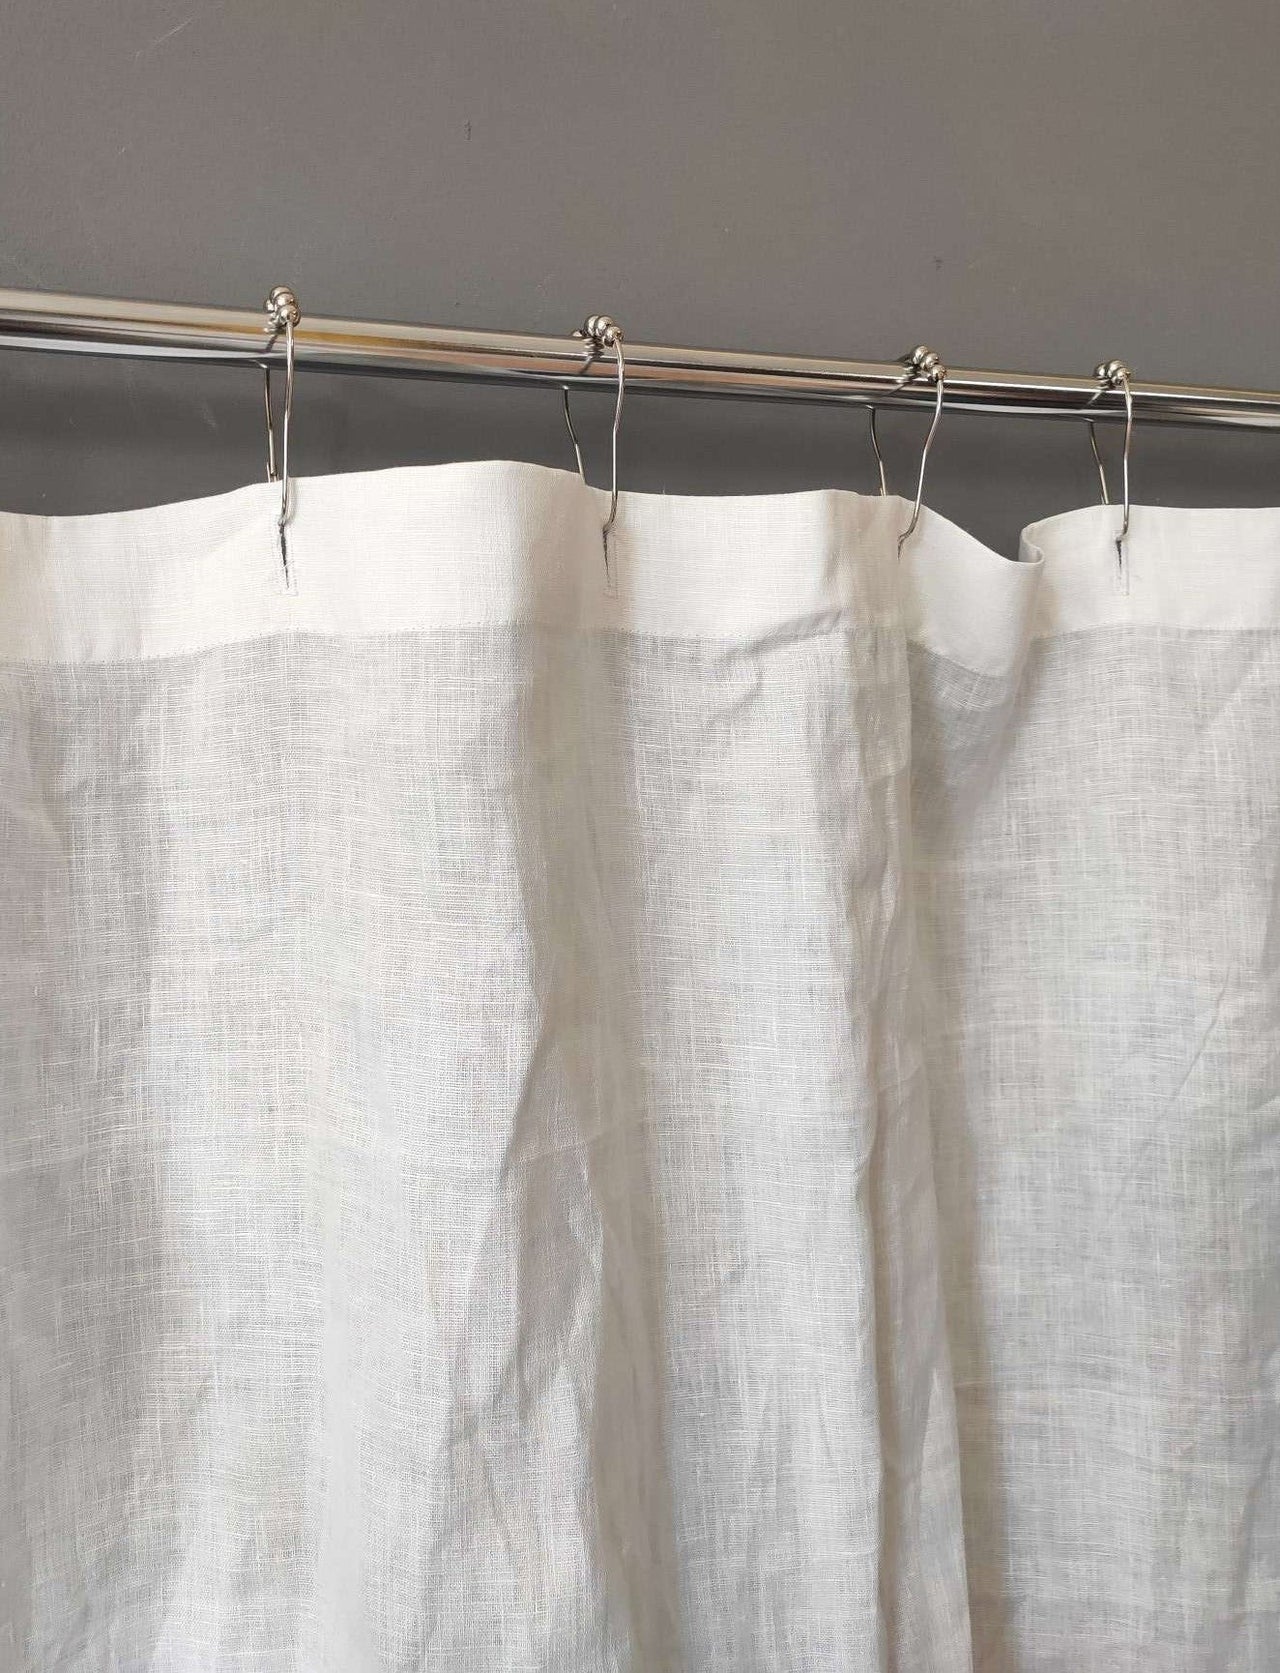 On Sale Linen Shower Curtain – Linen Bathroom Panel With Waterproof - Asparagus or Off-White Color